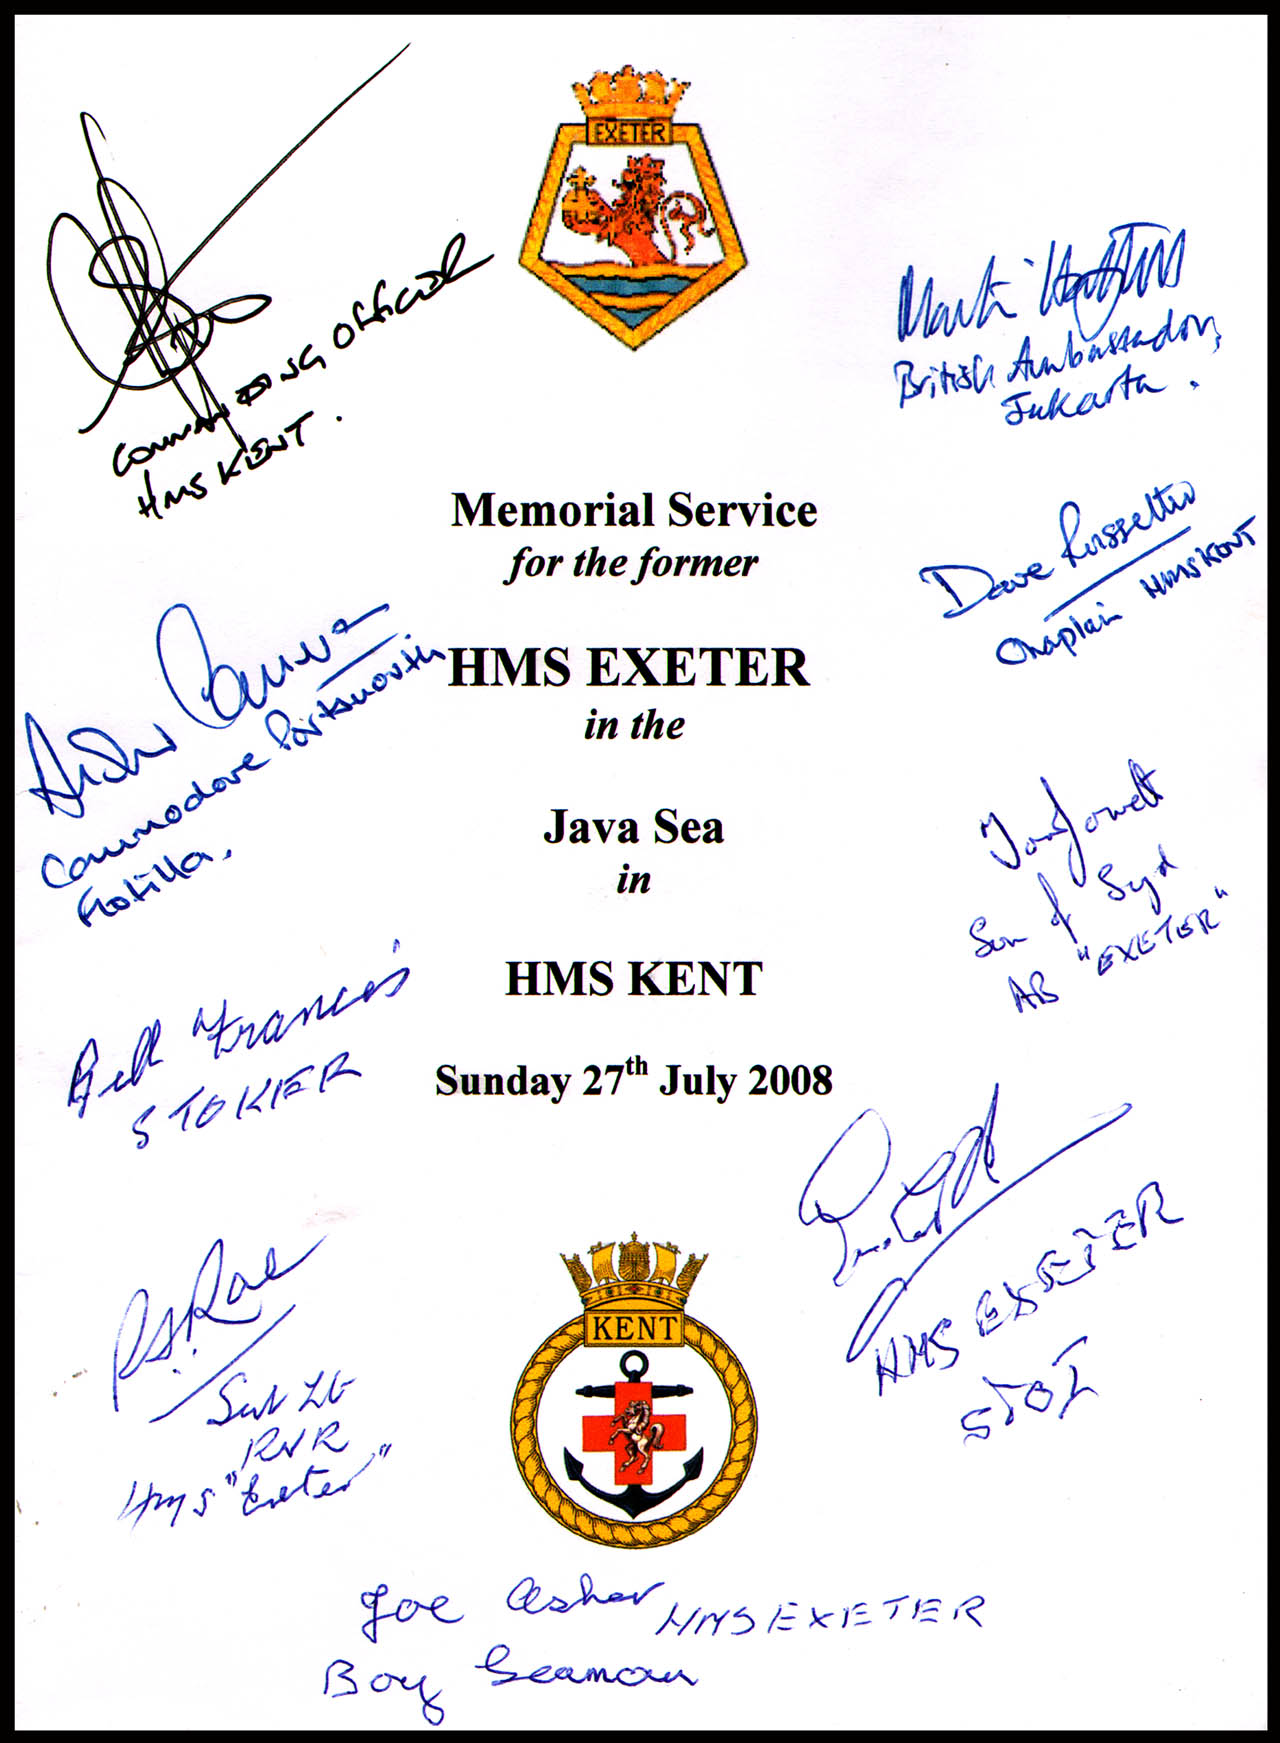 On July 27th 2008 a memorial service was held aboard HMS Kent over the wreck of HMS Exeter. The above shows the program booklet cover signed by attendant dignitaries which include; the British Ambassador to Indonesia, the Commodore Portsmouth Flotilla, the Commanding Officer HMS Kent, the Chaplain of HMS Kent (who conducted the memorial service), the four Exeter veterans present, and one veterans son.